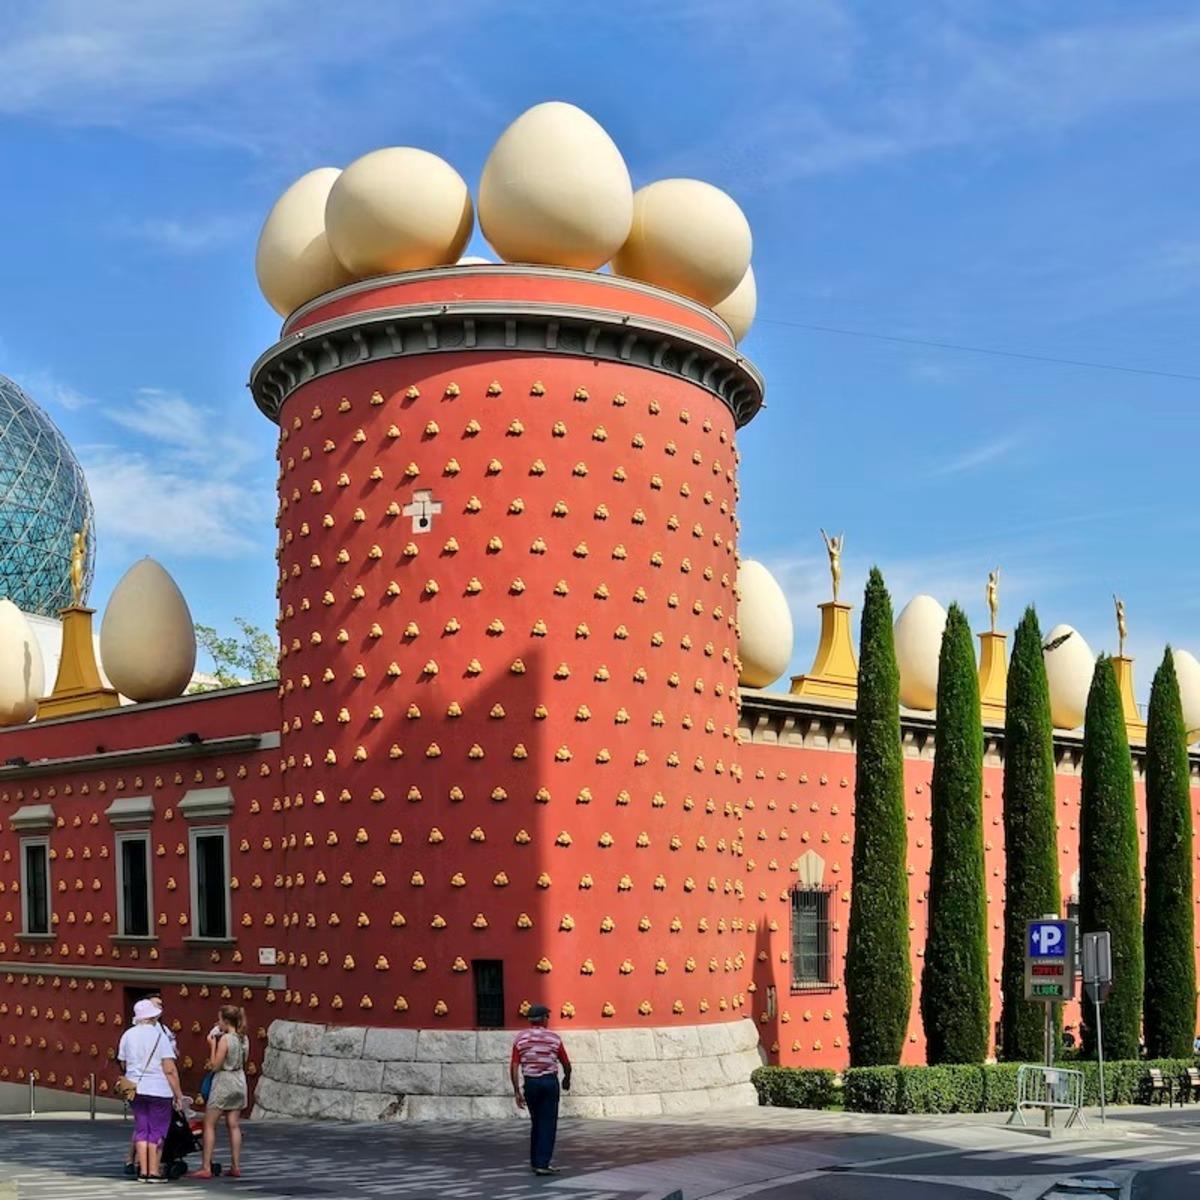 Dalí Theatre-Museum: Fast-track admission